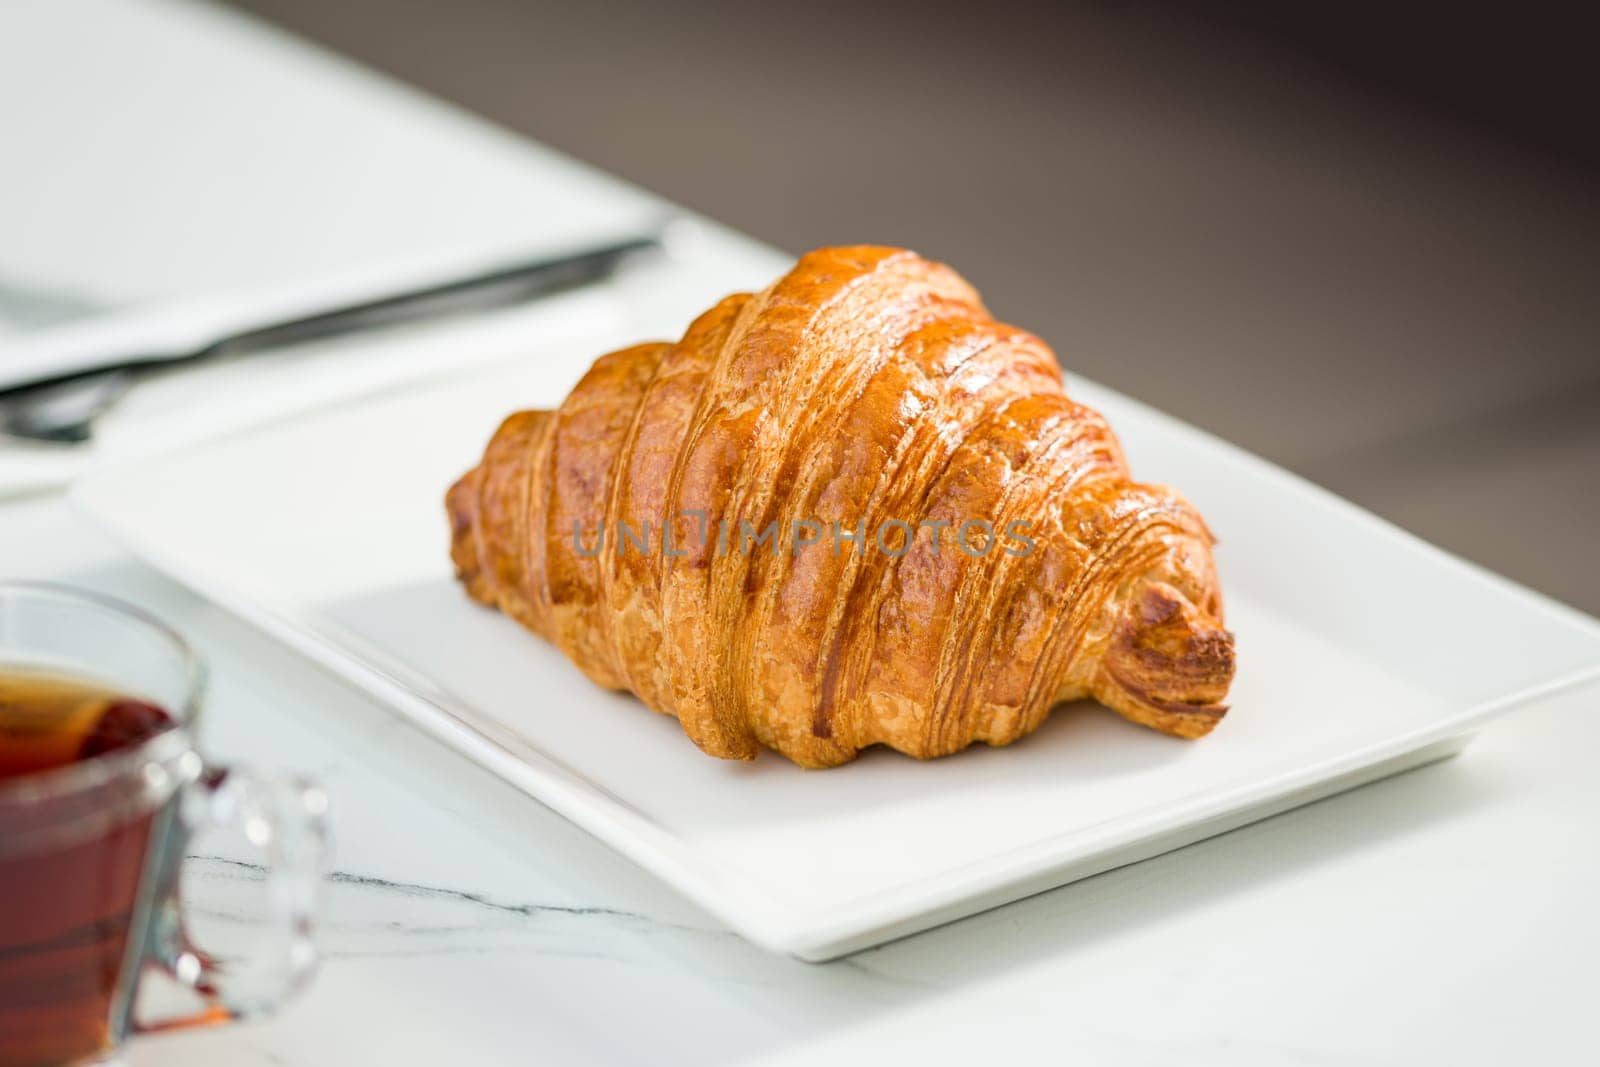 Croissant on a white porcelain plate with tea on the side